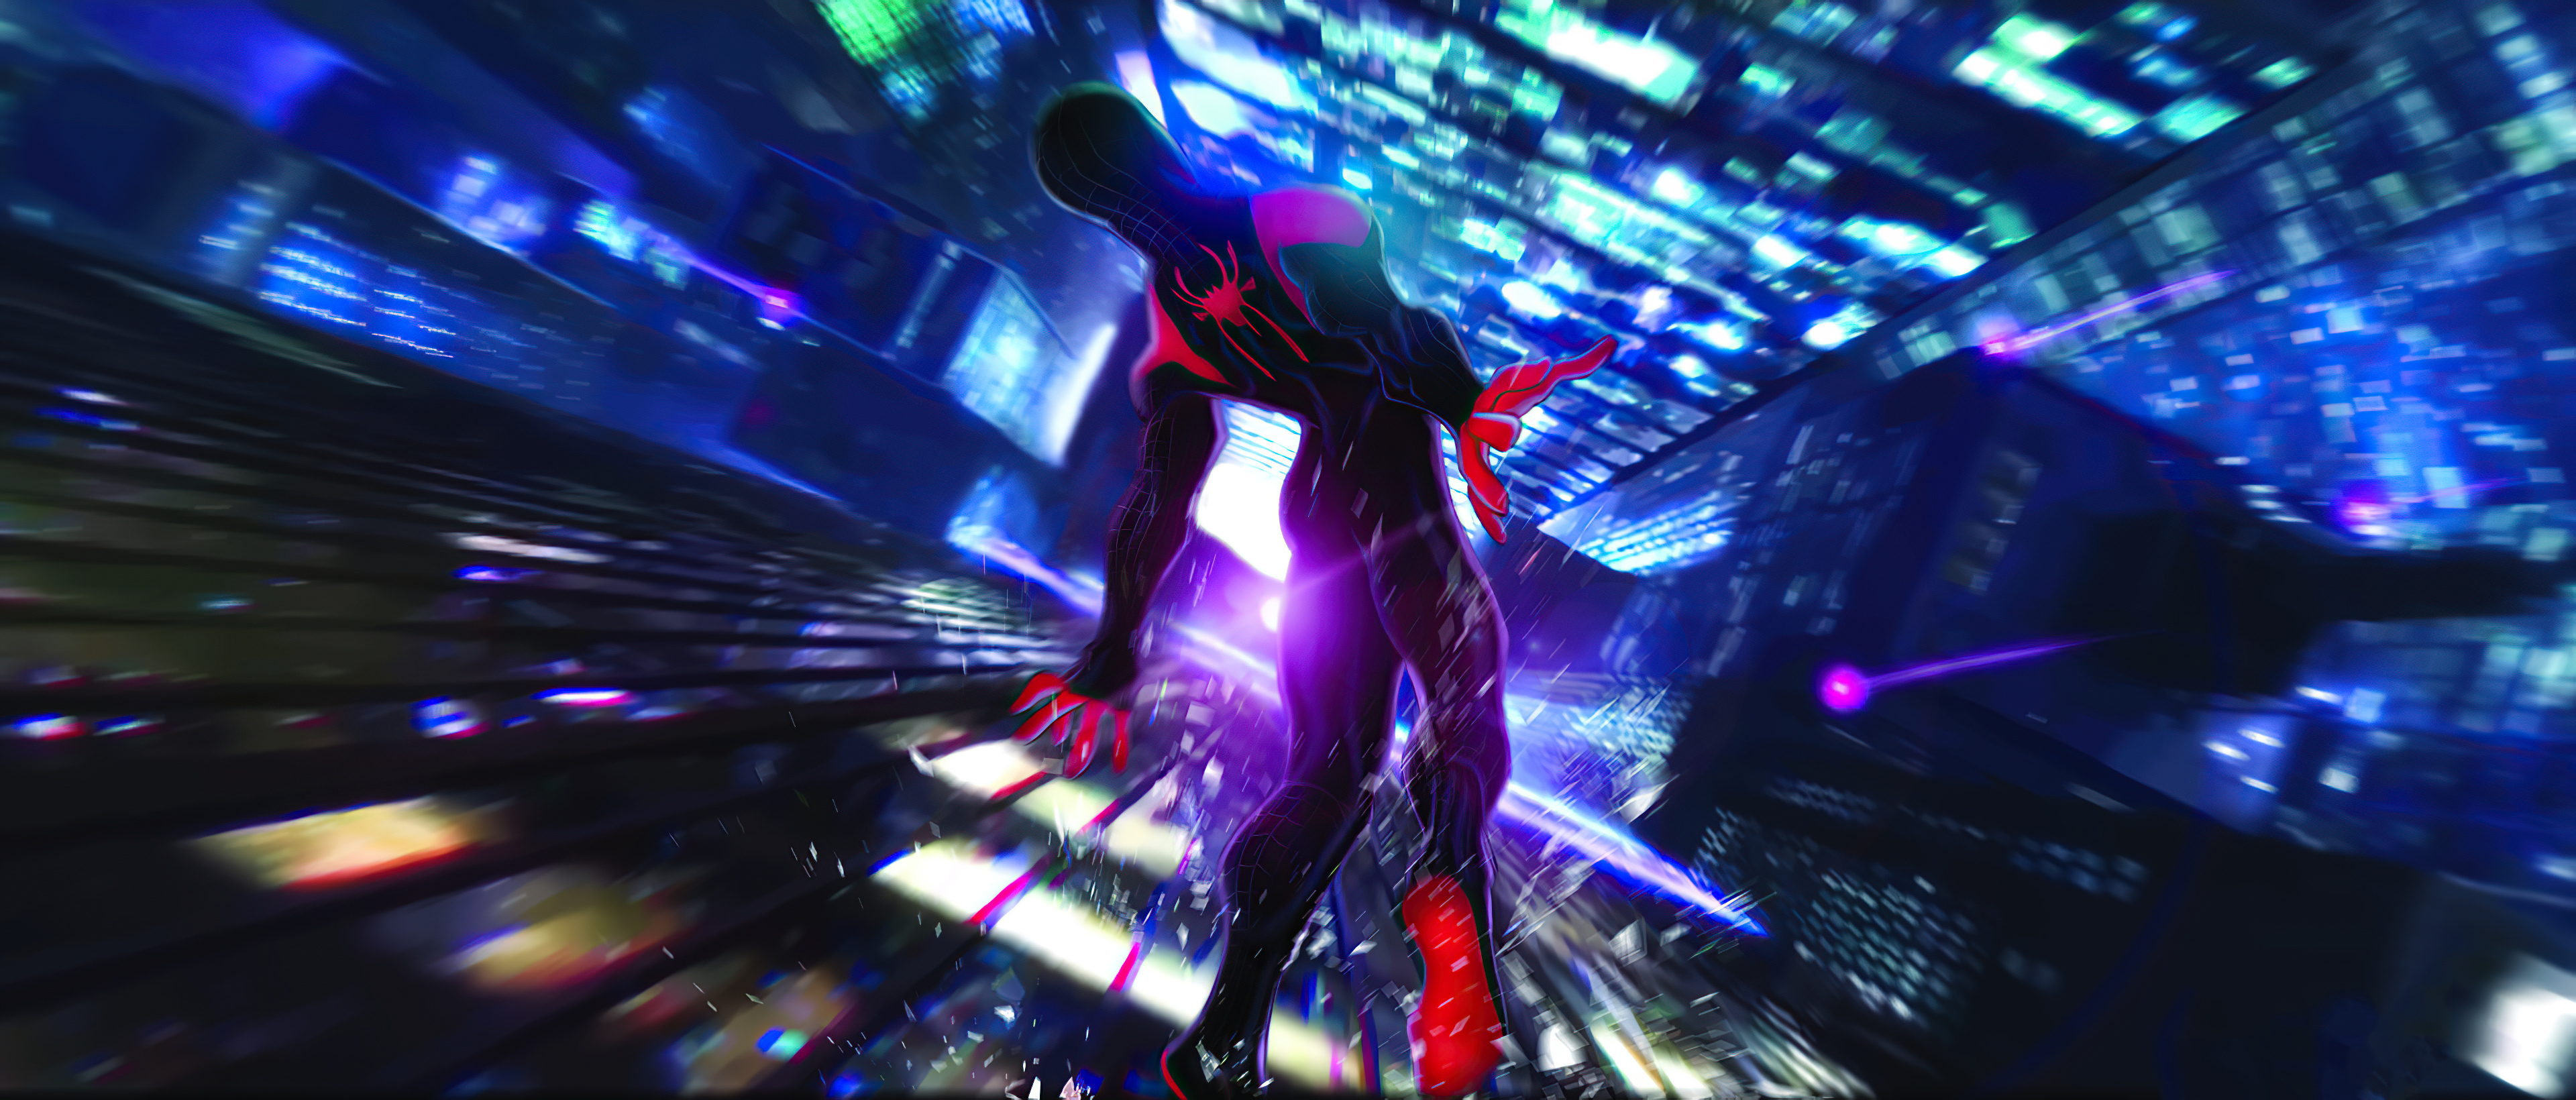 Spider-Man: Into The Spider-Verse HD Wallpaper by Mathew paul